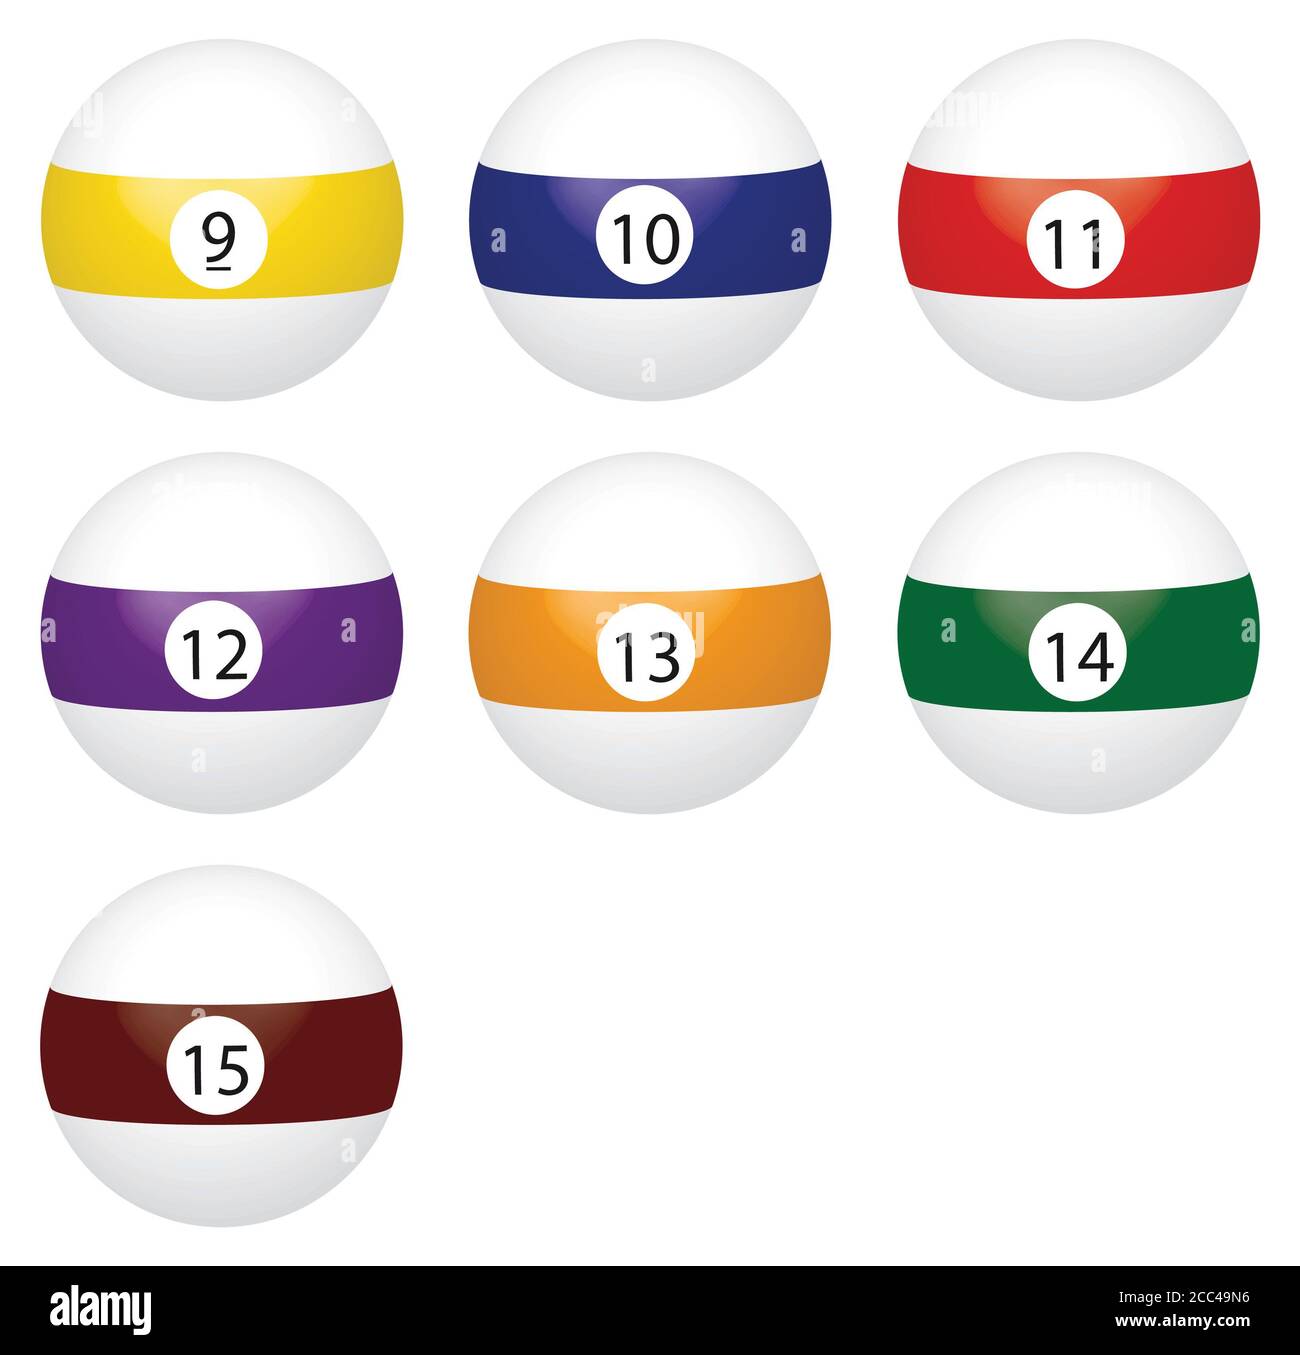 Illustration of billiard balls with numbers on white background Stock Photo